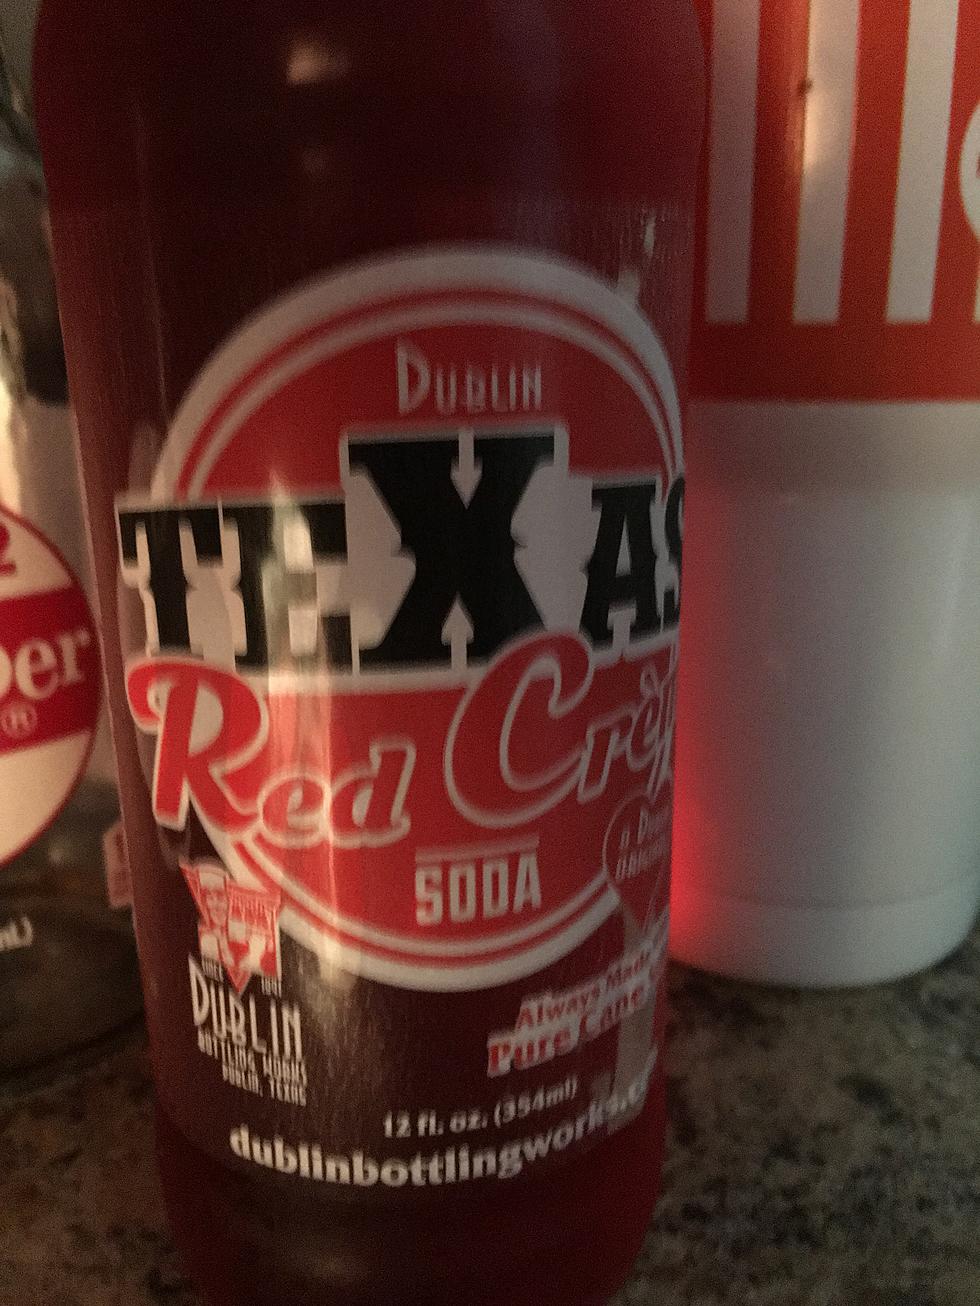 Dublin&#8217;s Texas Red Creme Soda is Easter Treat